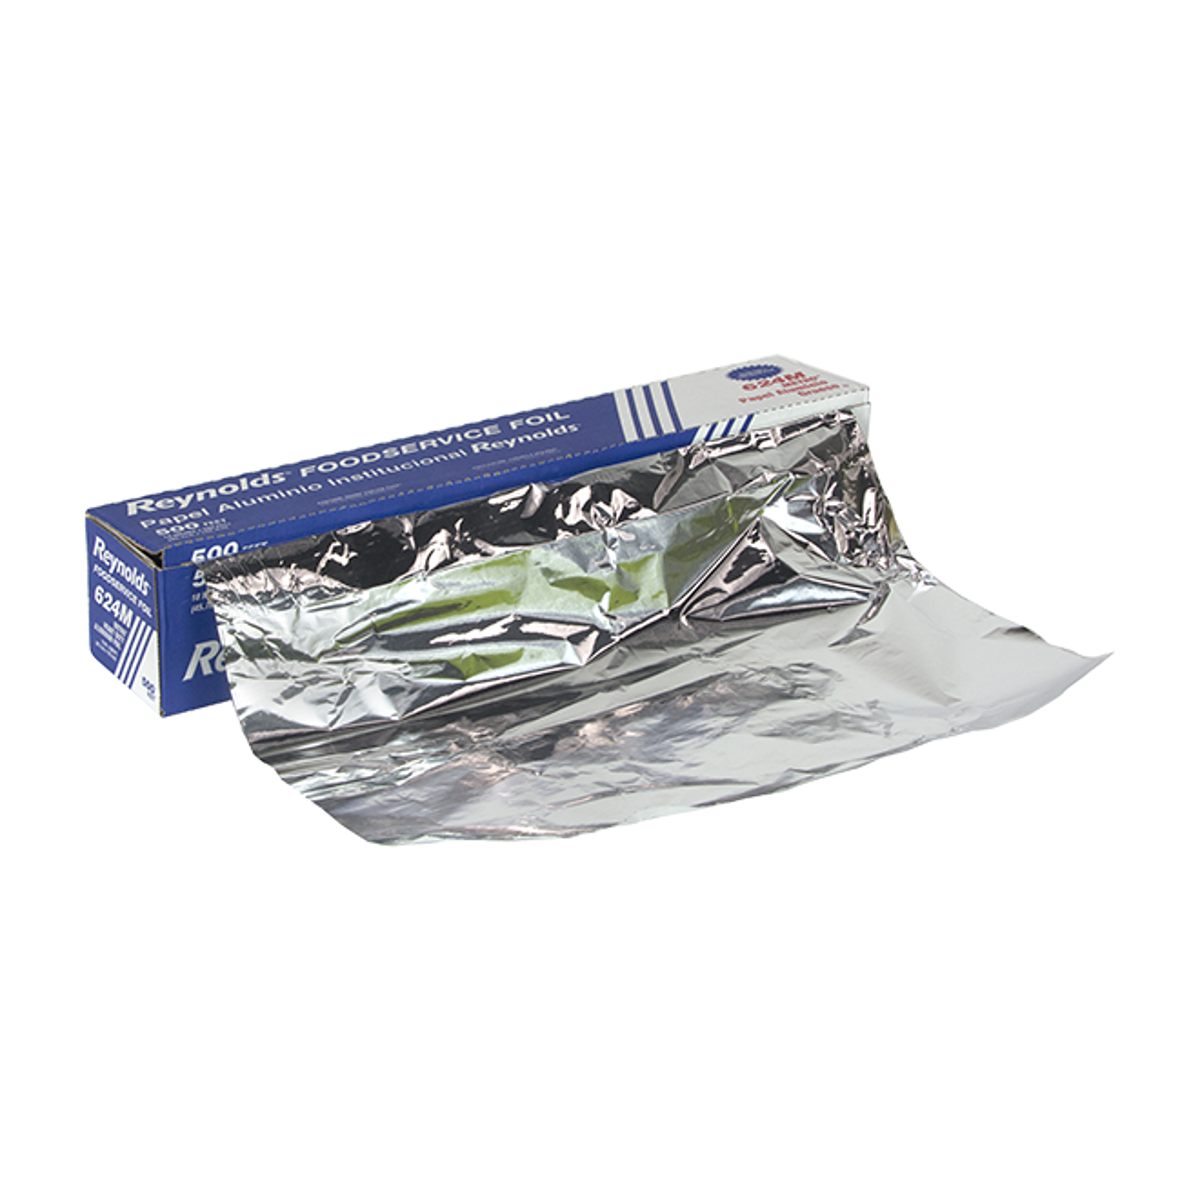 Heavy Duty Aluminum Foil Roll with Serrated Cutter 18X500' 